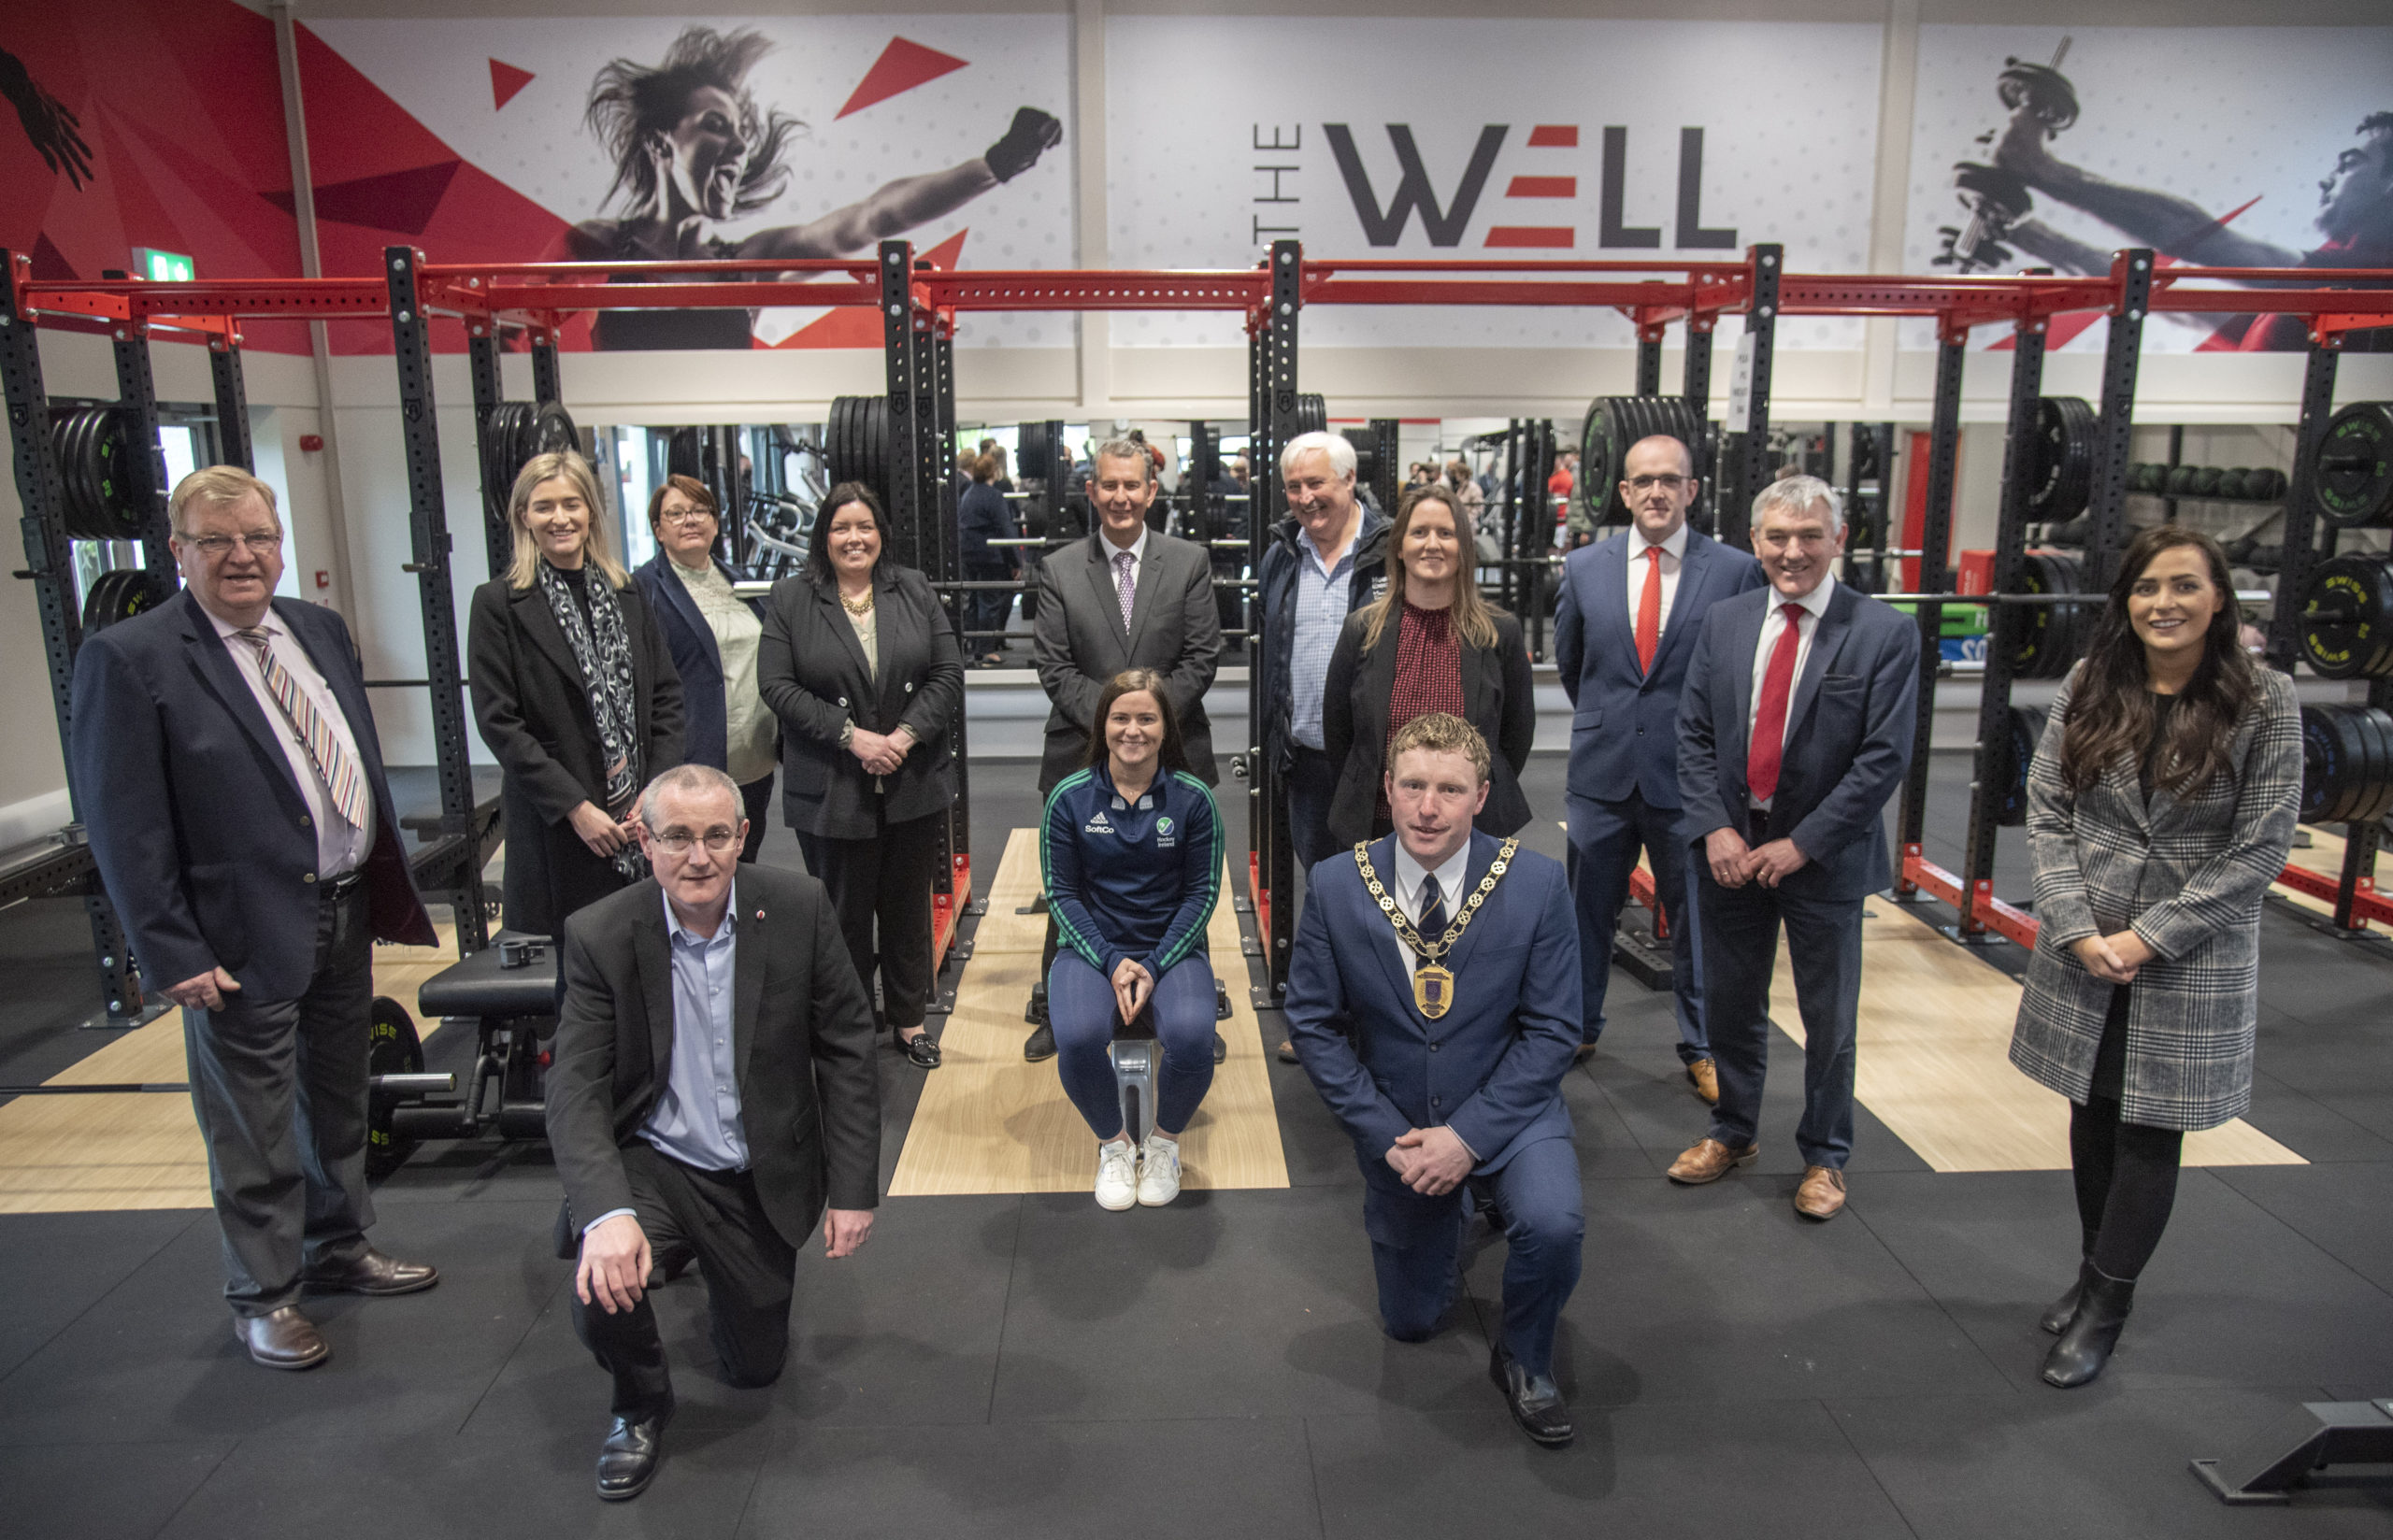 Historic day for Drumquin as new gym opens